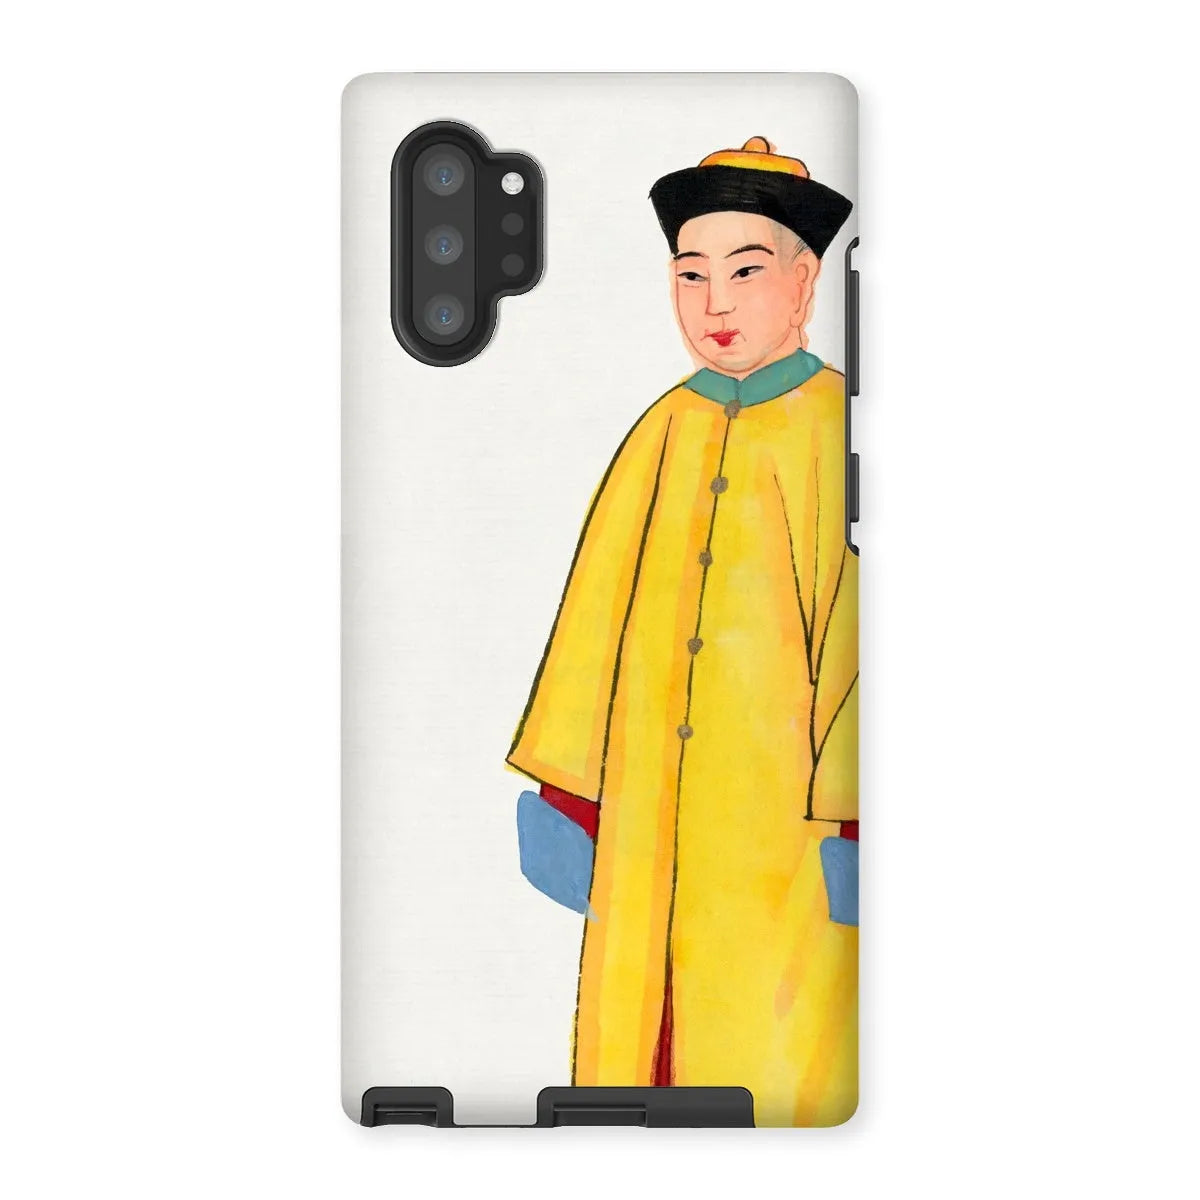 Priest In Yellow Robes - Chinese Aesthetic Art Phone Case - Samsung Galaxy Note 10p / Matte - Mobile Phone Cases